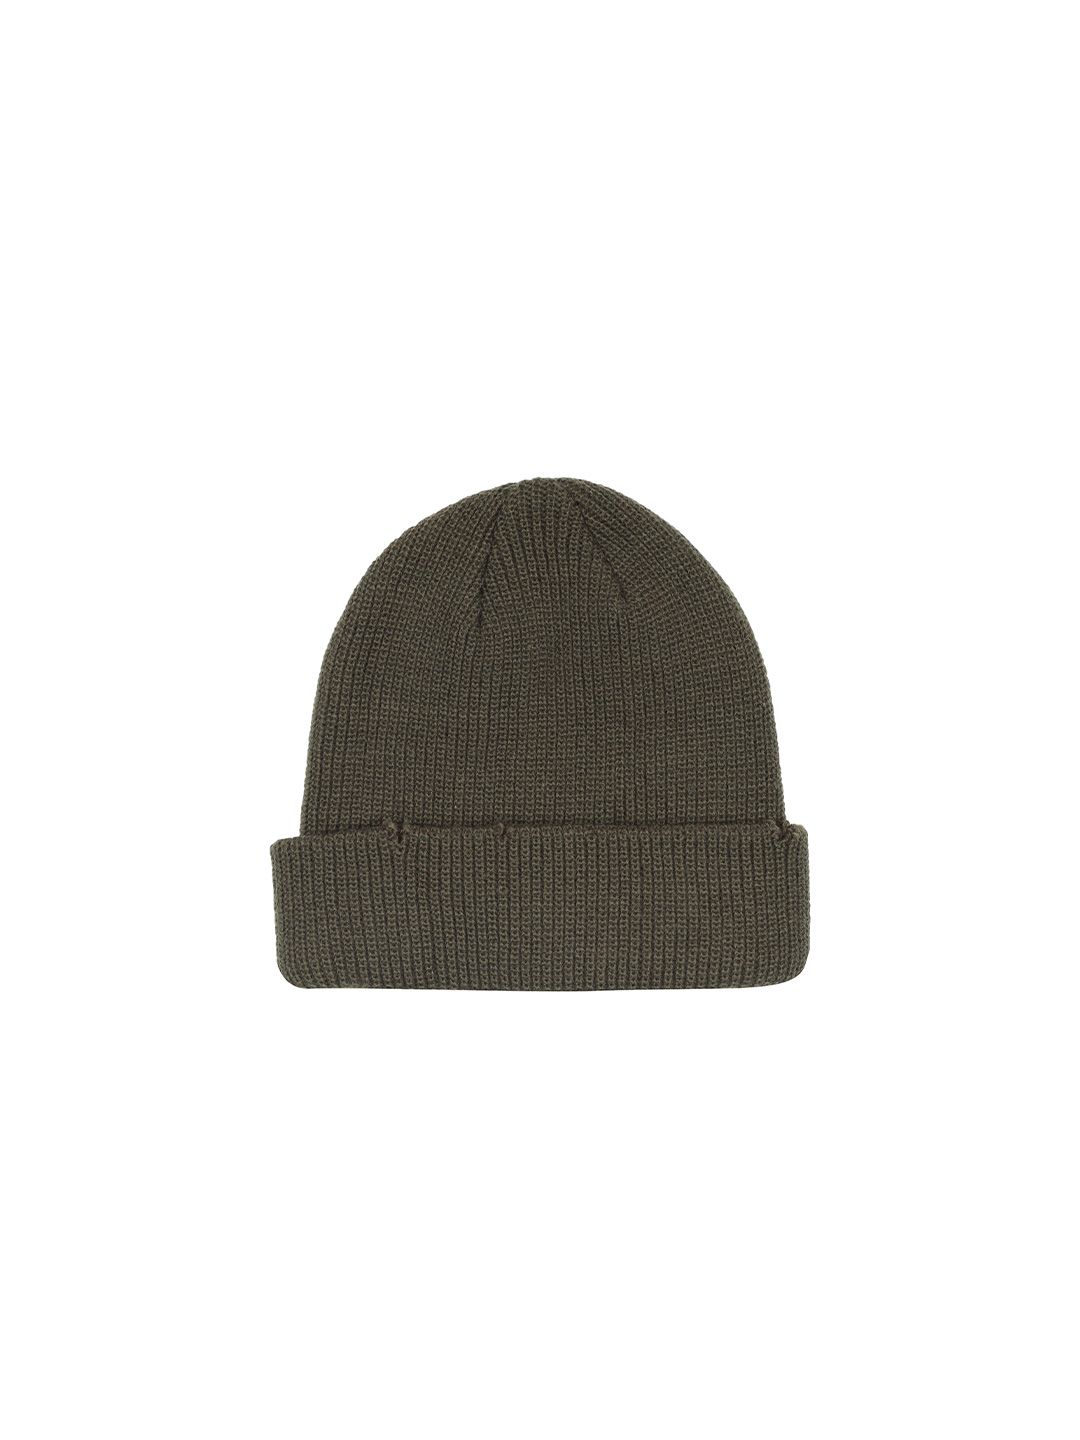 FabSeasons Unisex Olive Green Acrylic Beanie Price in India